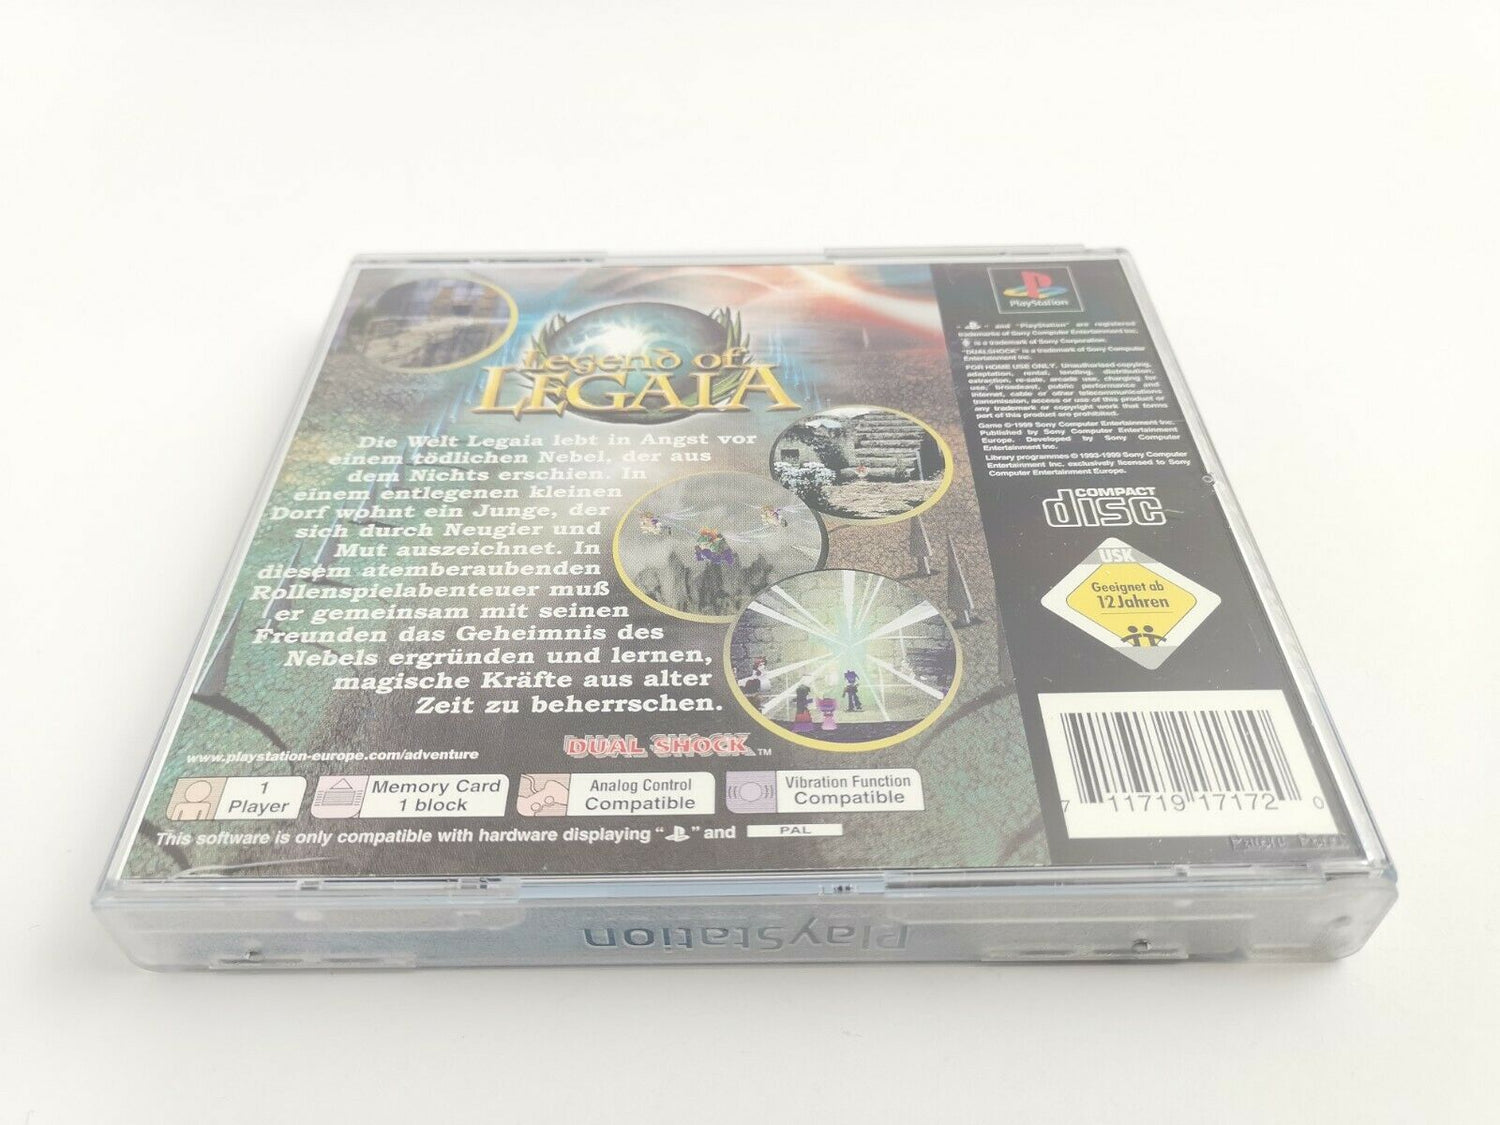 Sony Playstation 1 Game 